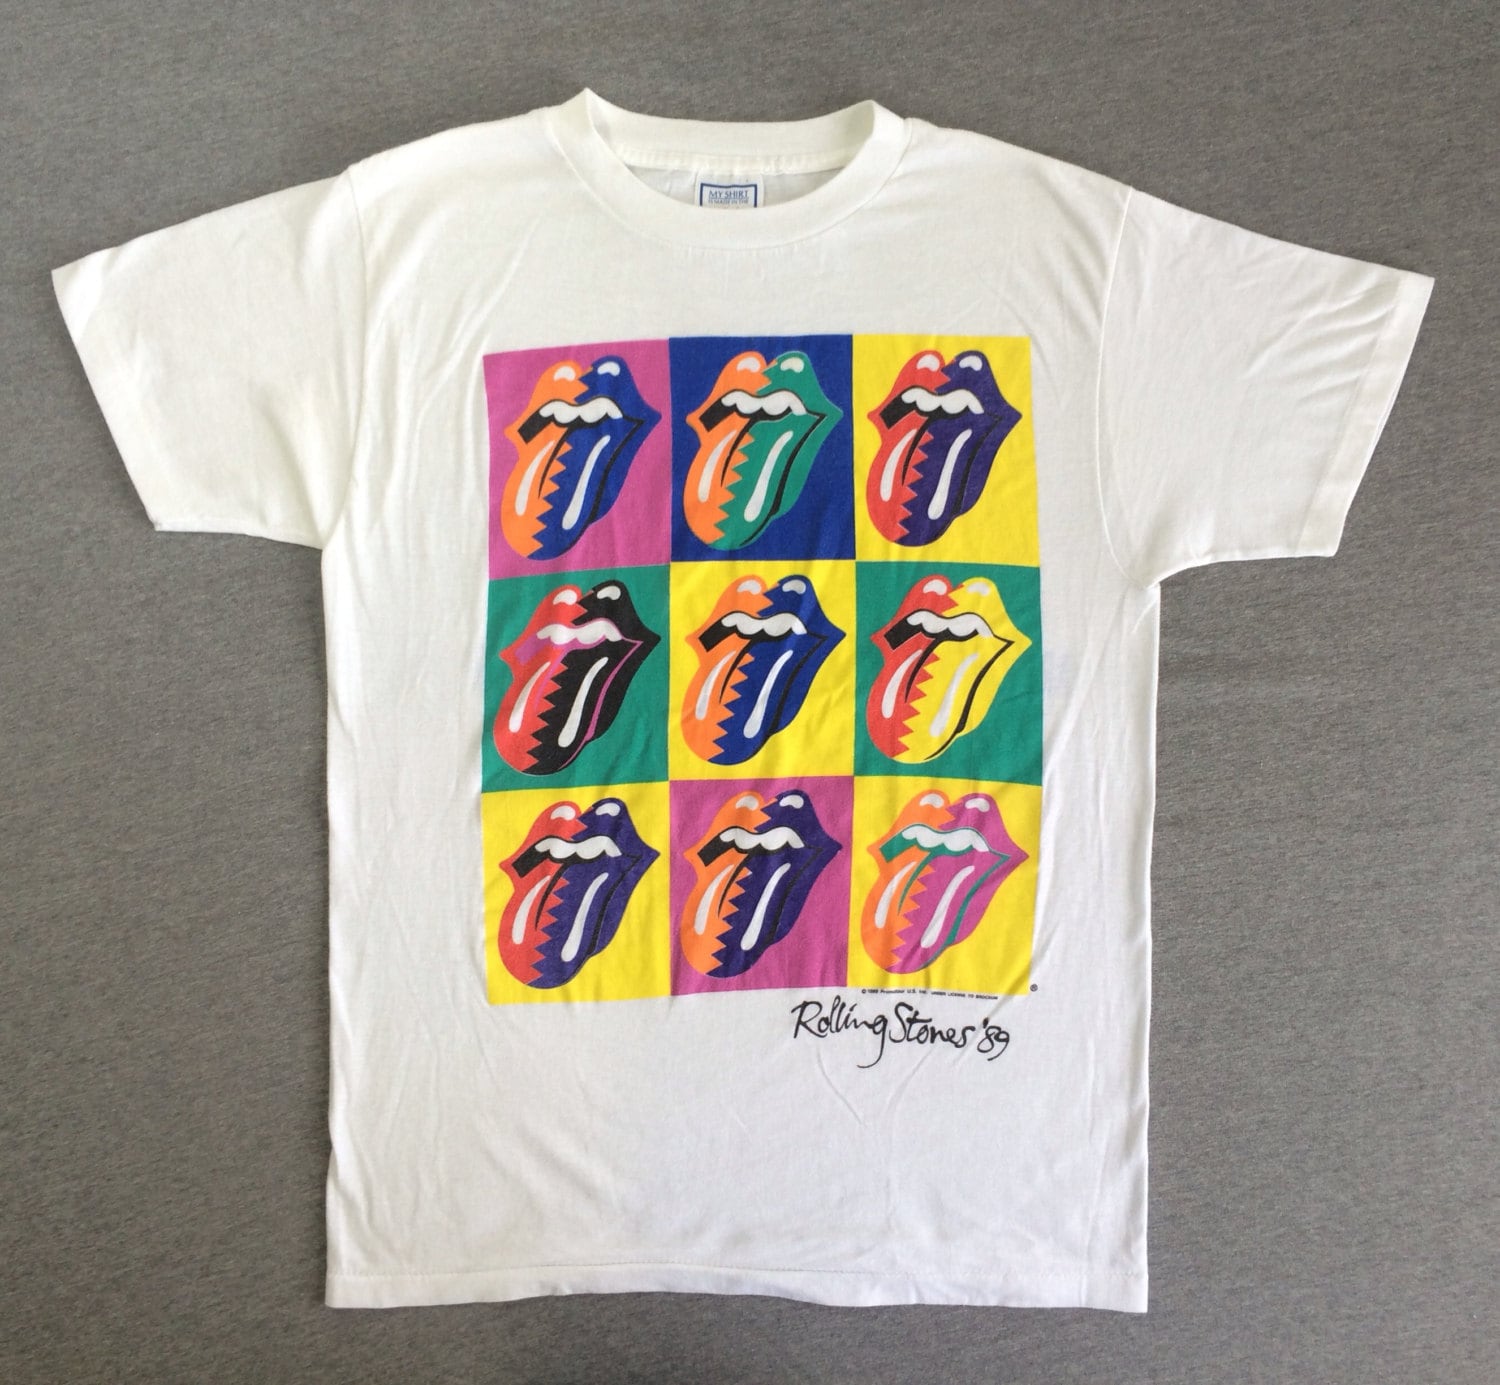 Kuwait vintage rolling stones 1989 t shirt steel wheels tour out business, Tight prom dresses with slits, cold shoulder long sleeve dress. 